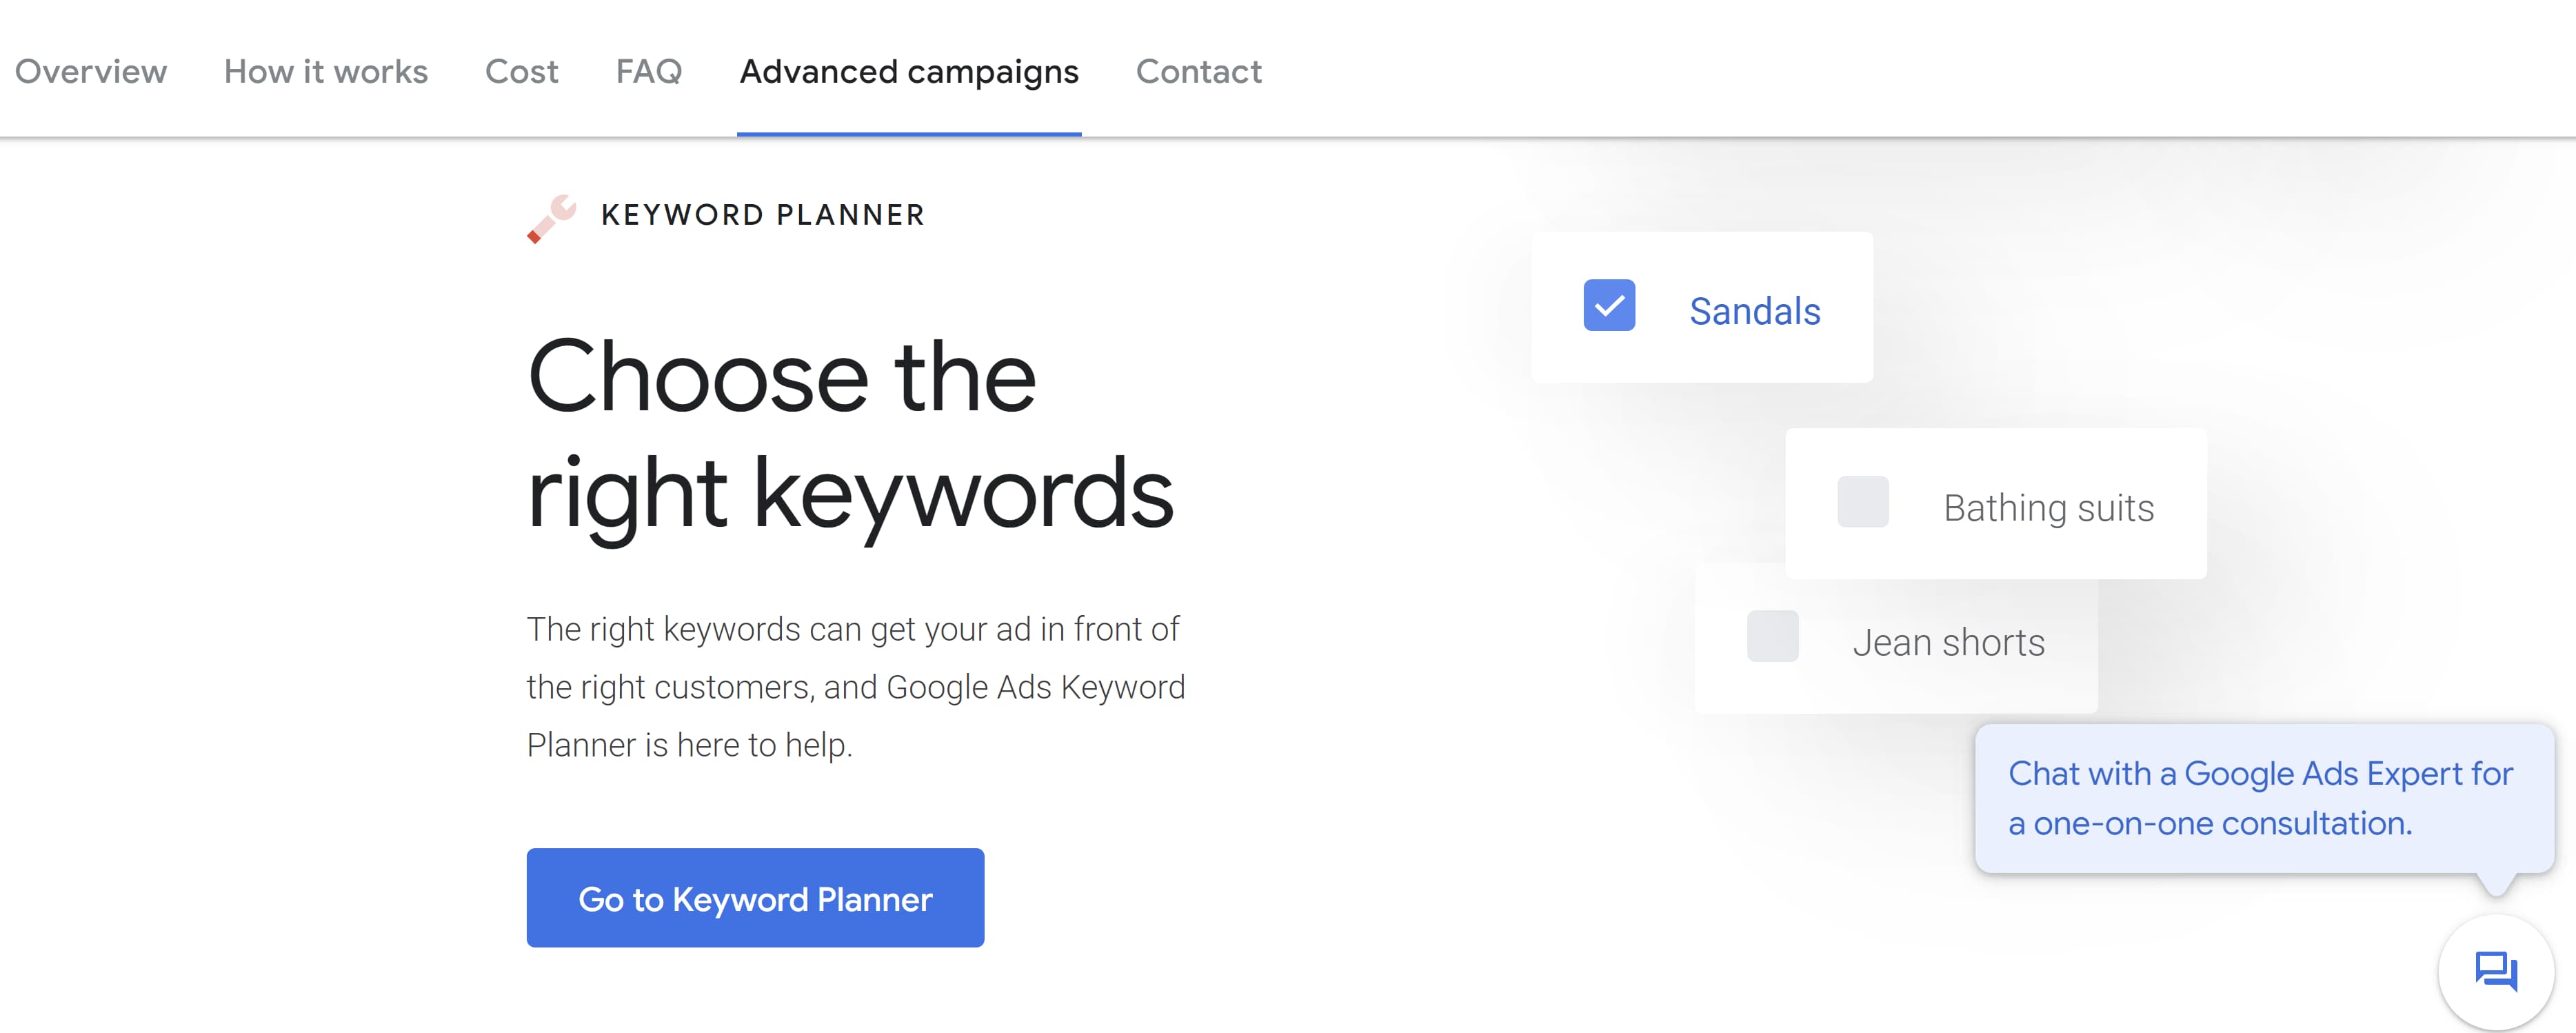 Google Keyword Planner can be used to promote your YouTube channel